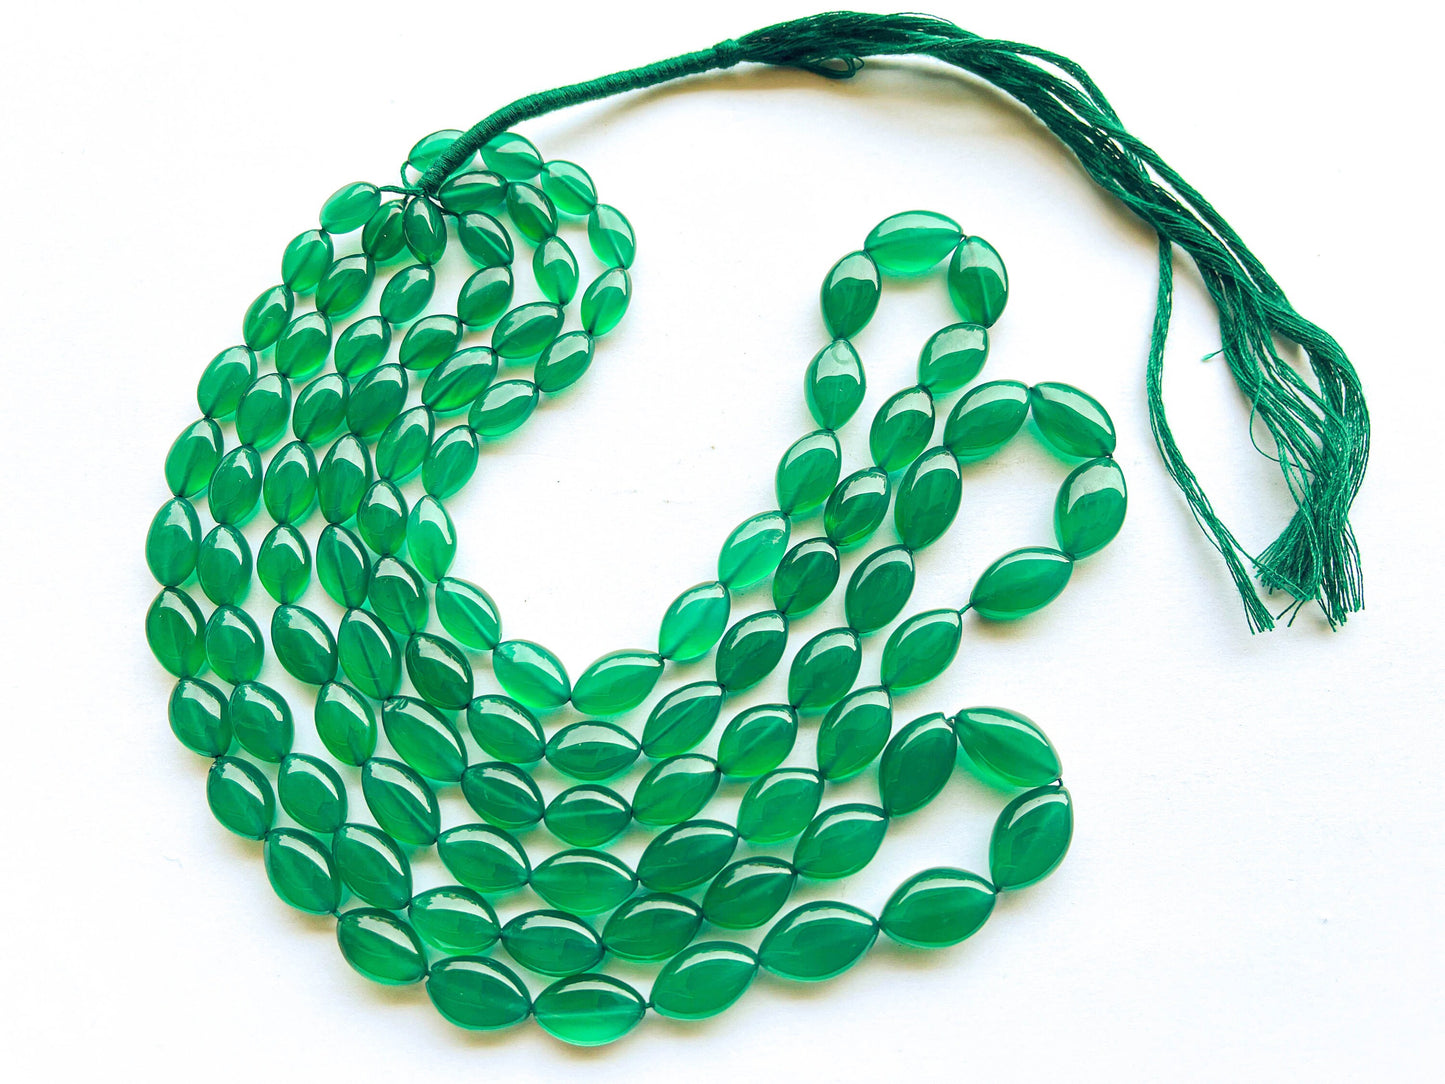 Green Onyx Marquise shape Smooth Briolette beads, 6x10mm to 9x15mm, 16 Inches String, 30 Pieces, Natural Gemstone